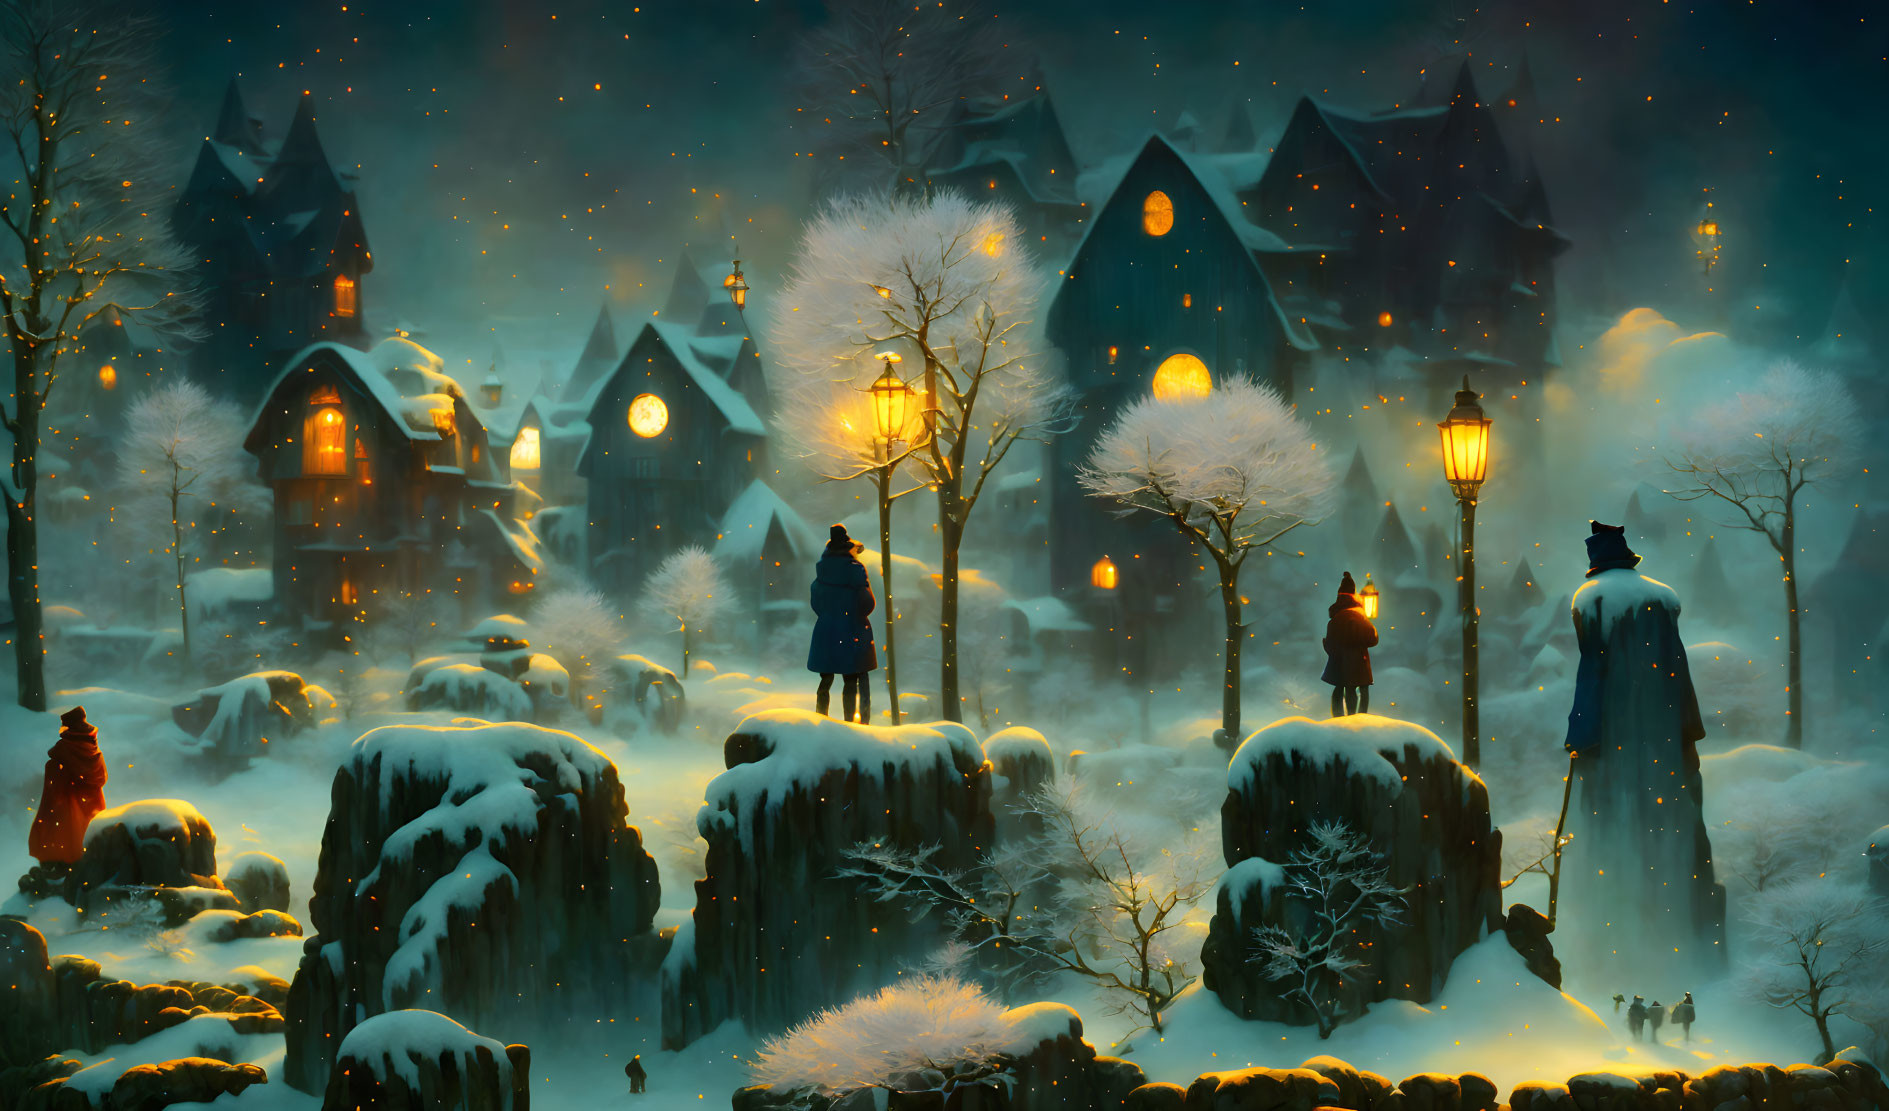 Victorian houses in snowy night scene with street lamps and silhouettes